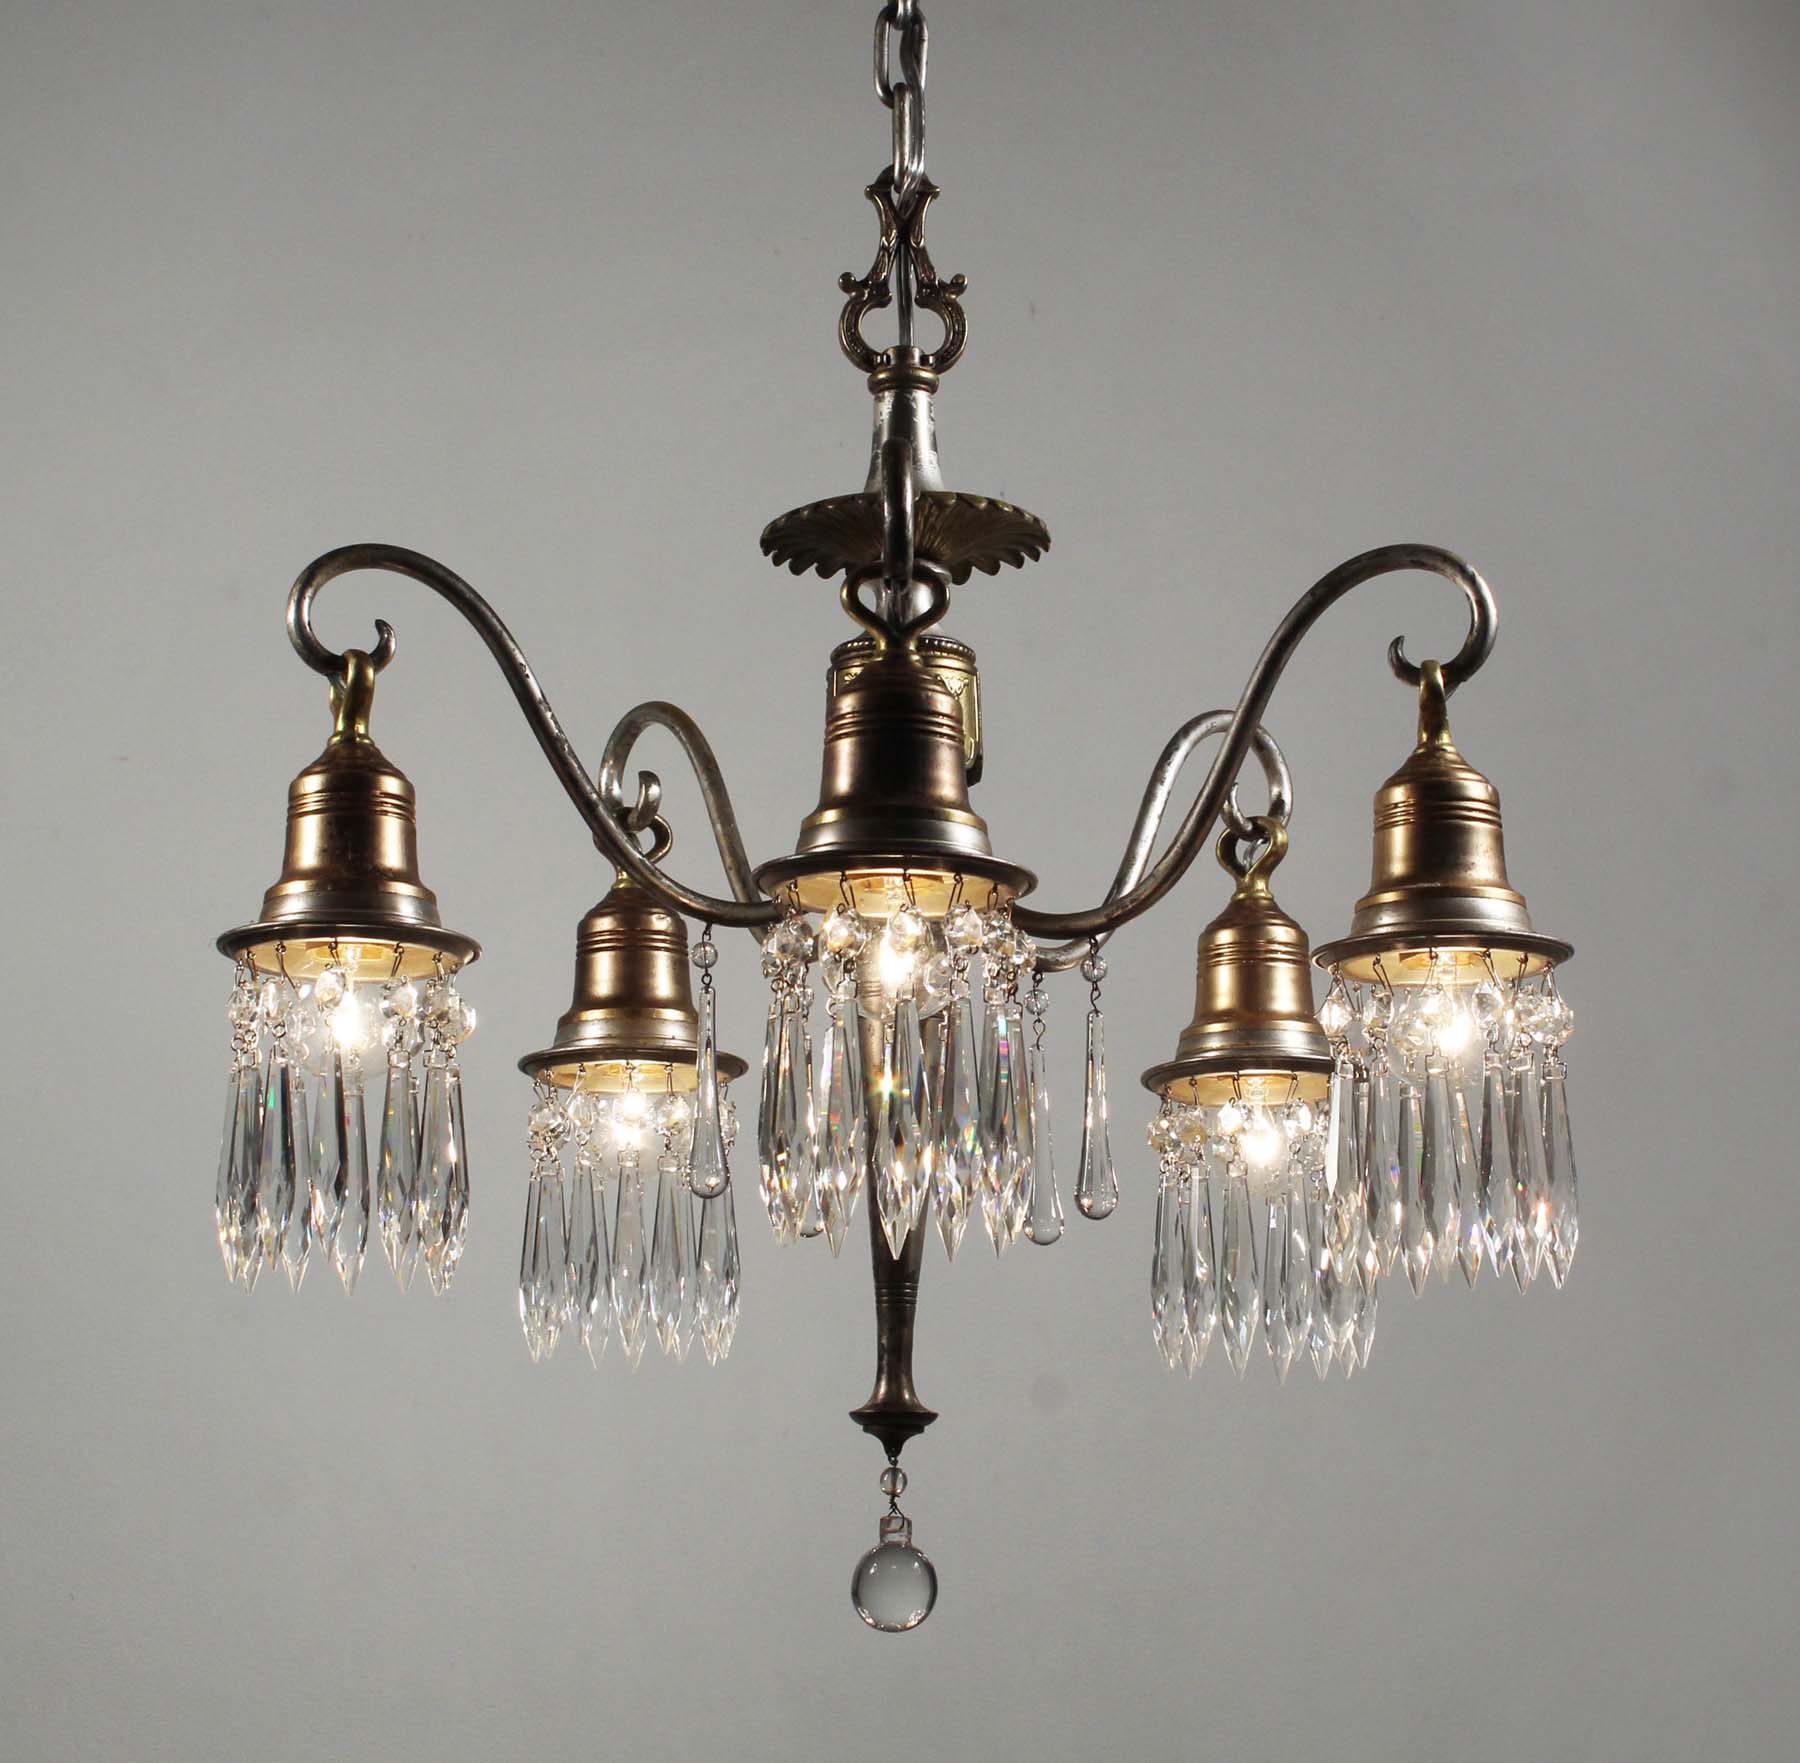 SOLD Neoclassical Chandelier with Prisms, Antique Lighting-68395